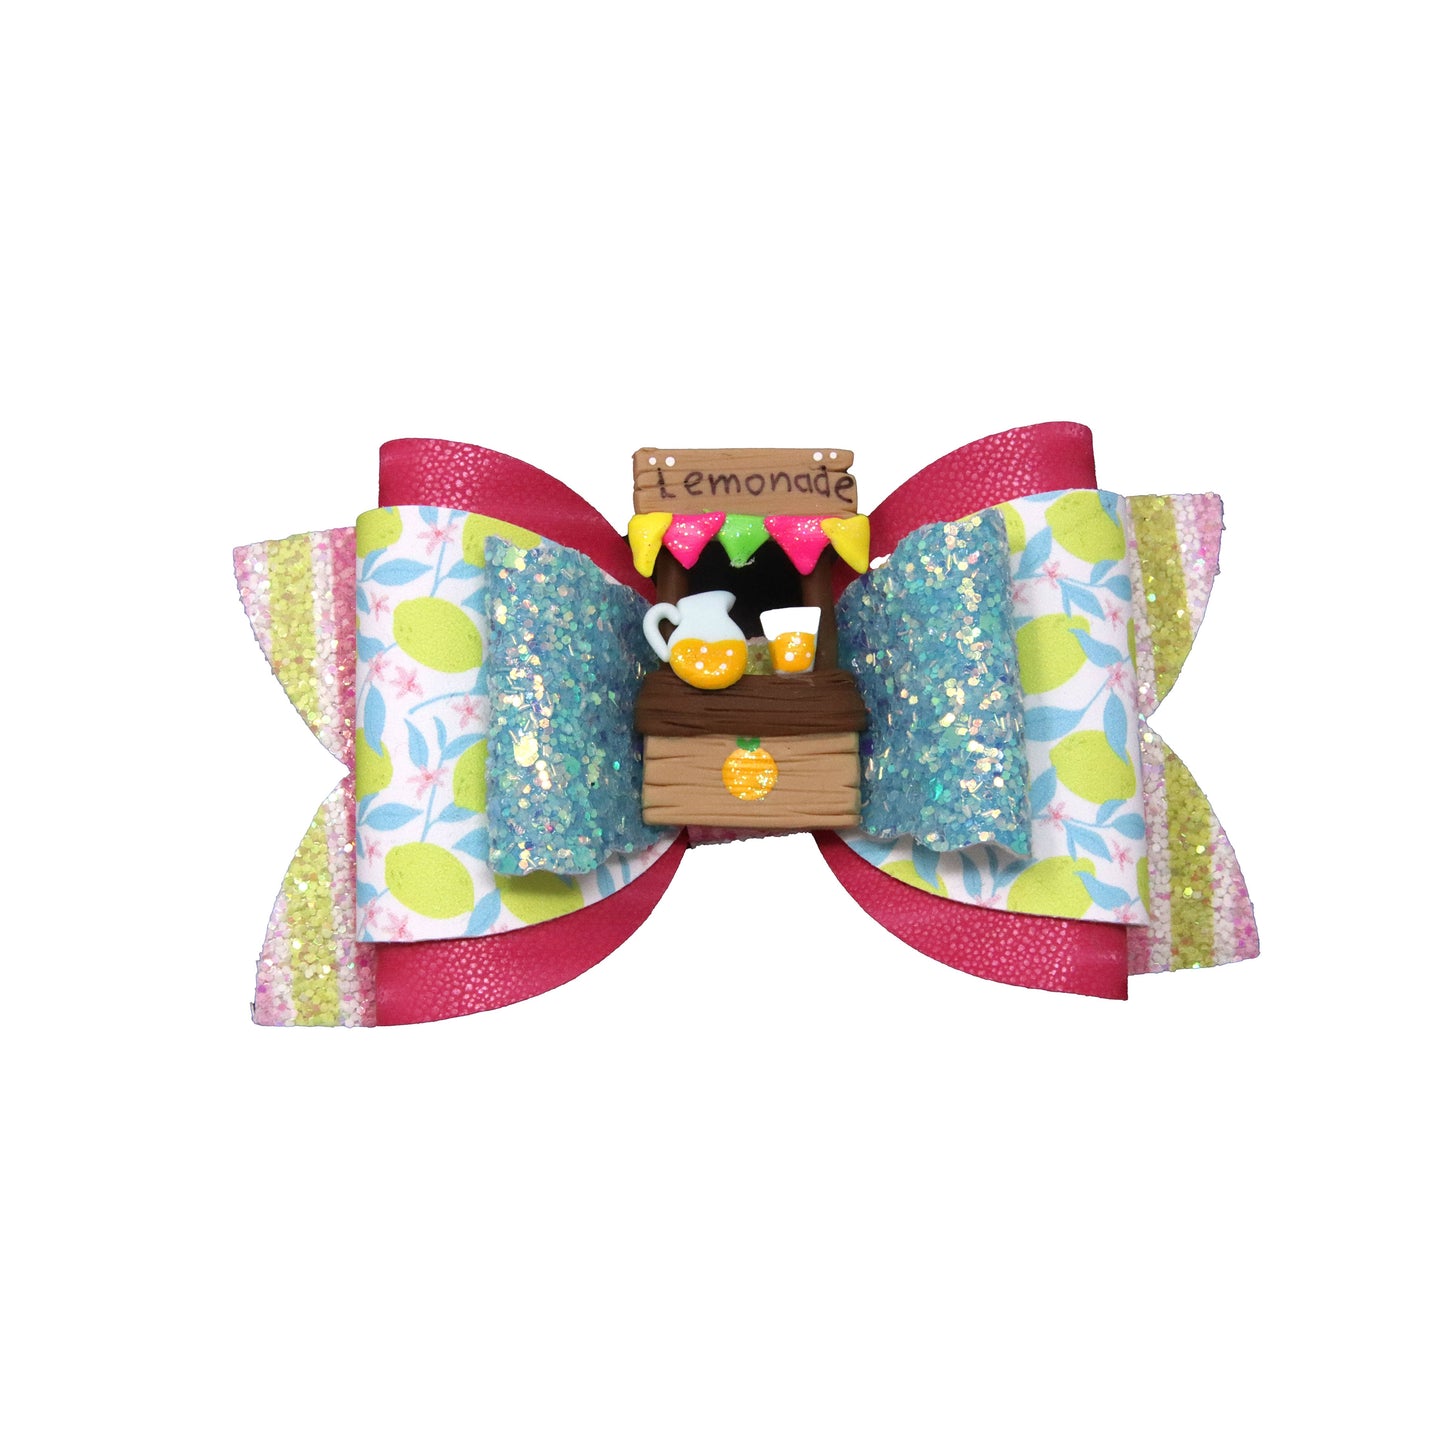 5" Lemonade Dressed-up Double Diva Bow 5" with Lemonade Stand Clay